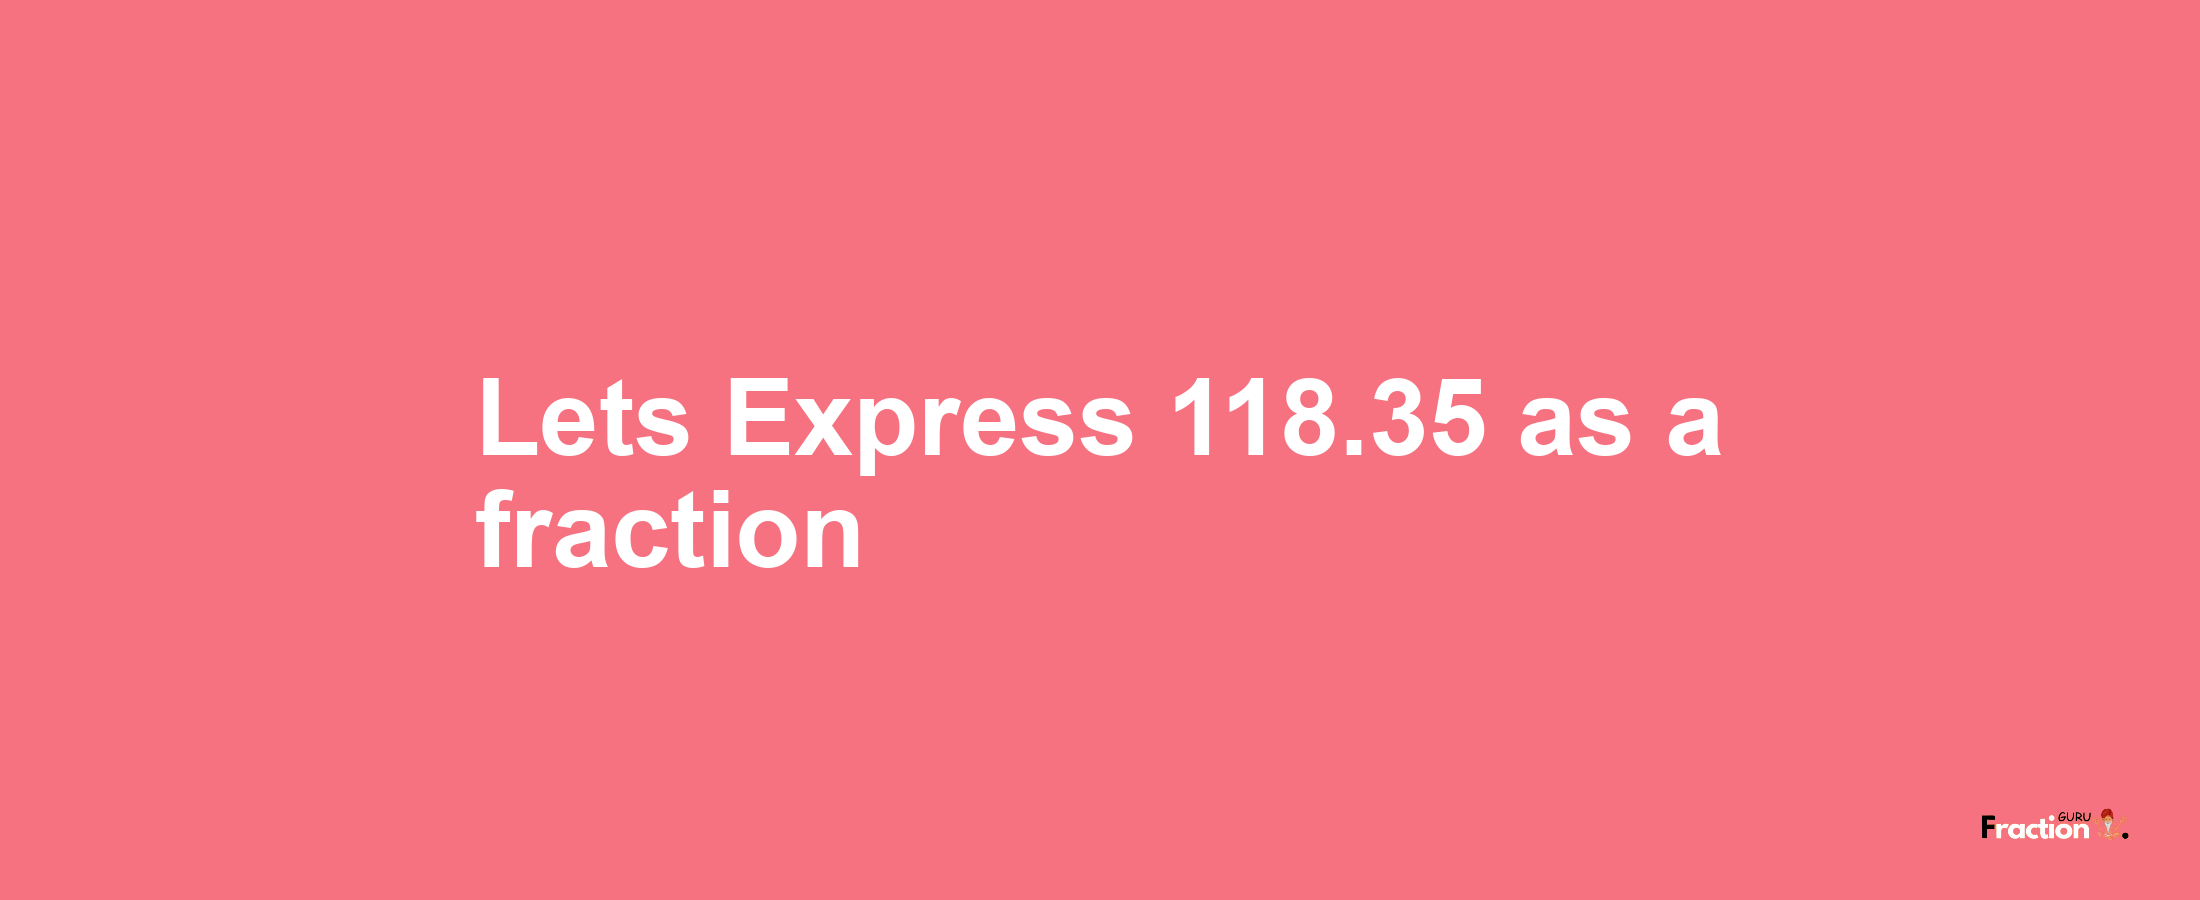 Lets Express 118.35 as afraction